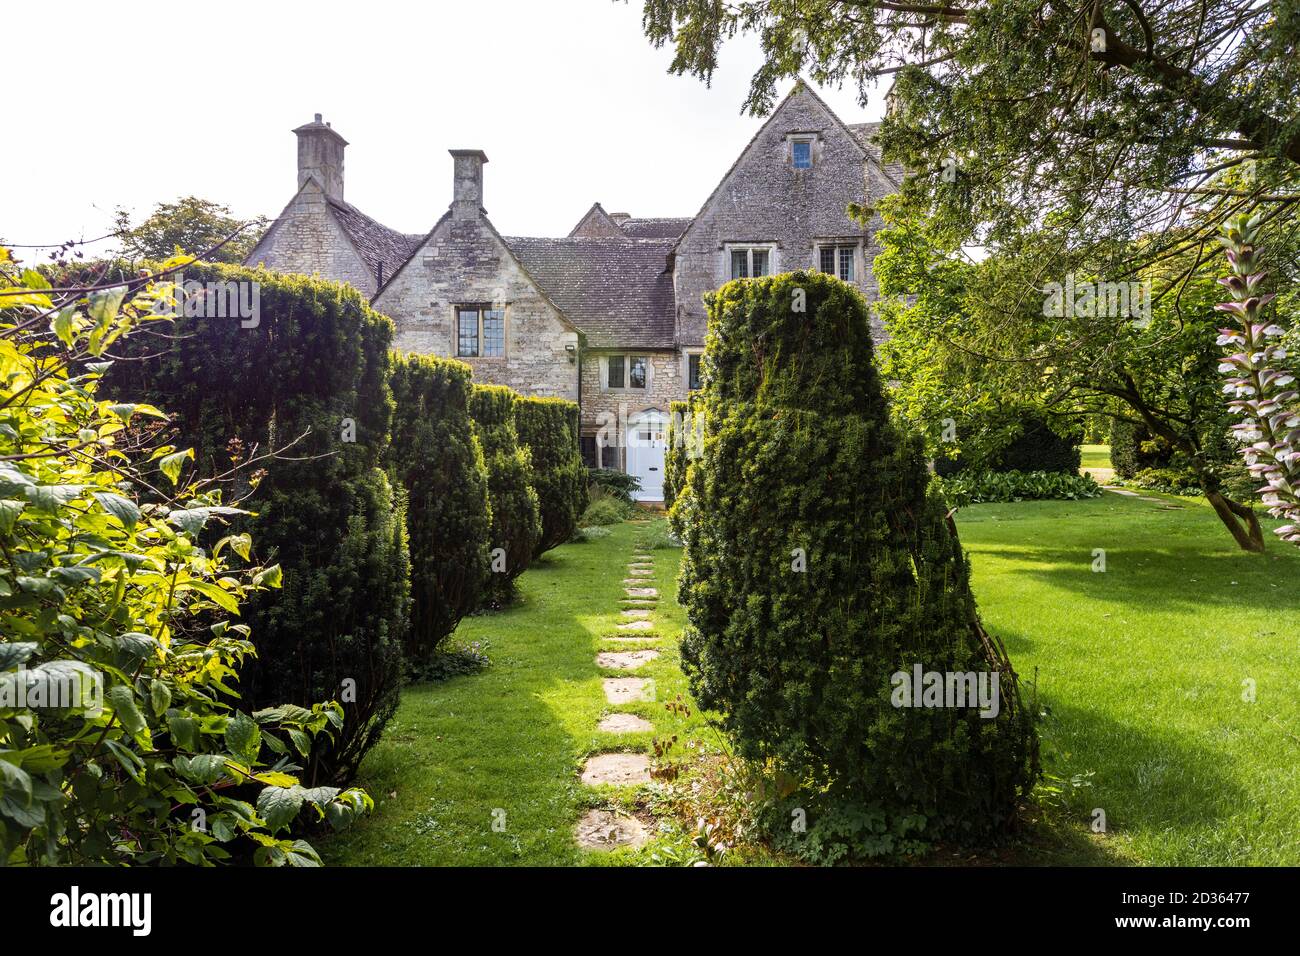 Overcourt, a manor house dating back to the 14th century, in the Cotswold village of Bisley, Gloucestershire UK Stock Photo